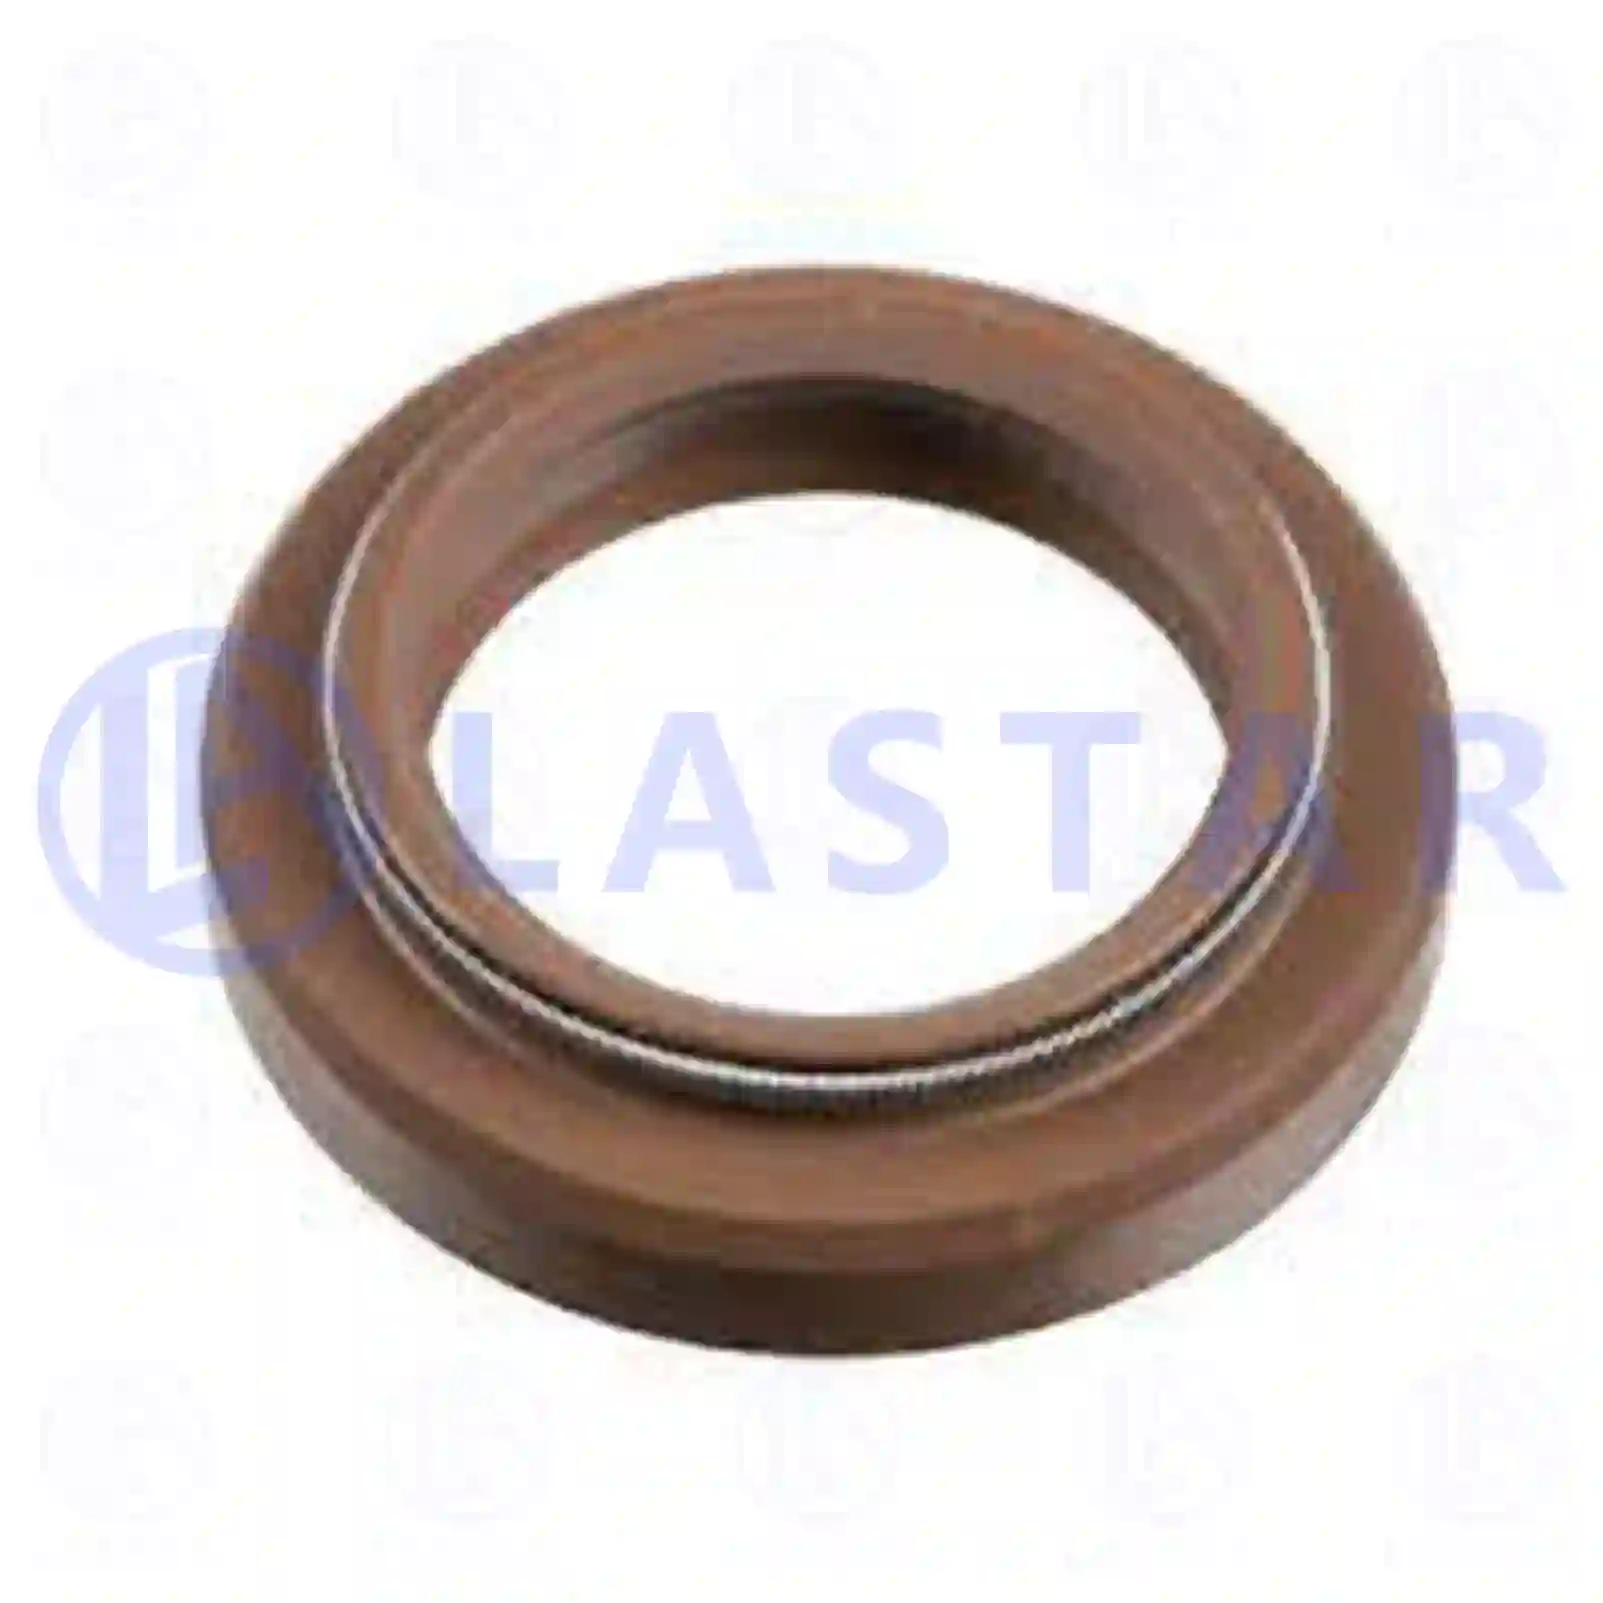 Oil seal, 77731959, 0002670197, 0002670397, ||  77731959 Lastar Spare Part | Truck Spare Parts, Auotomotive Spare Parts Oil seal, 77731959, 0002670197, 0002670397, ||  77731959 Lastar Spare Part | Truck Spare Parts, Auotomotive Spare Parts